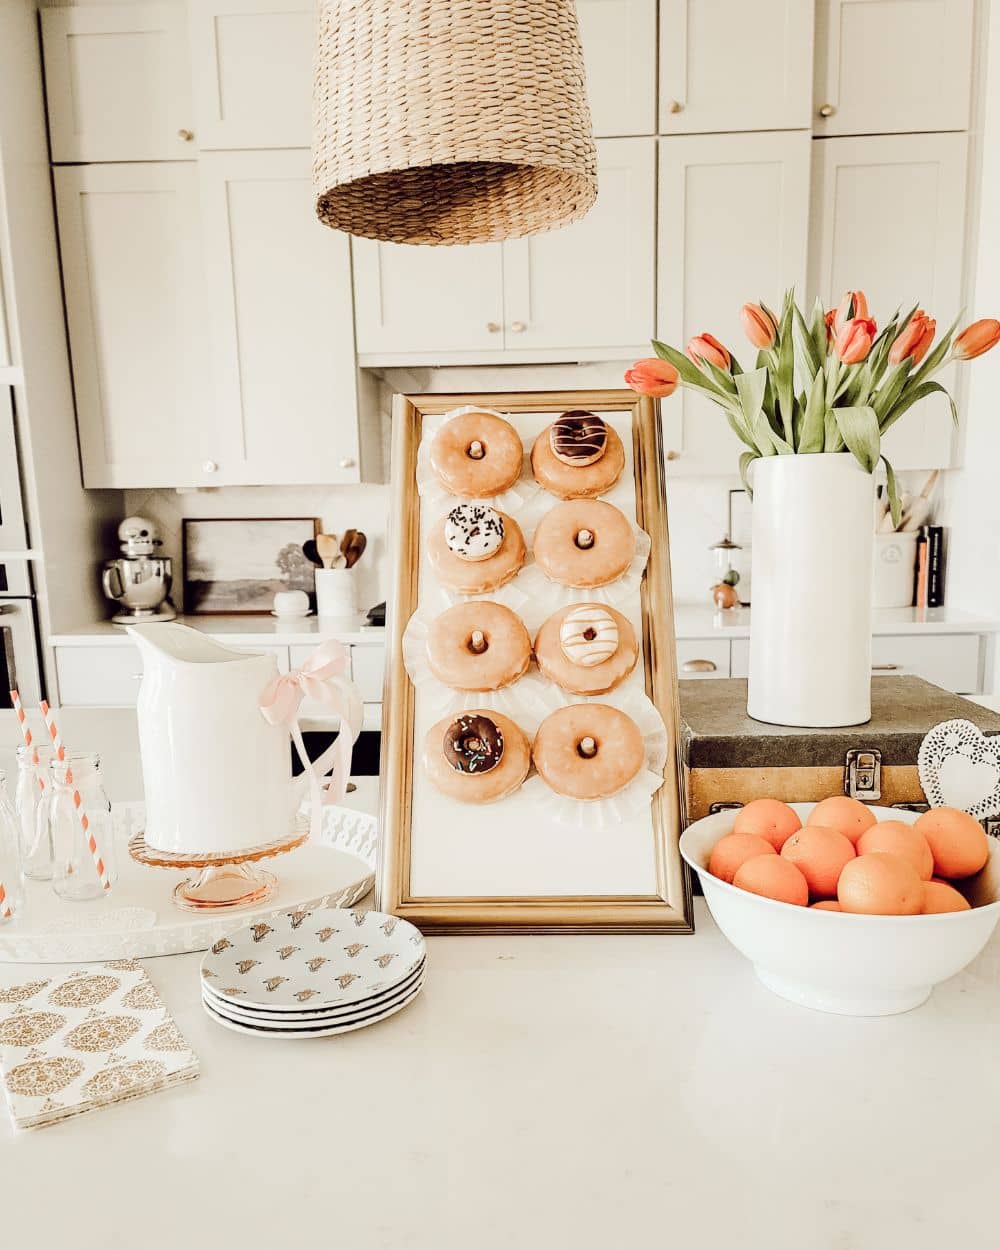 A completed donut board on display with breakfast goodies